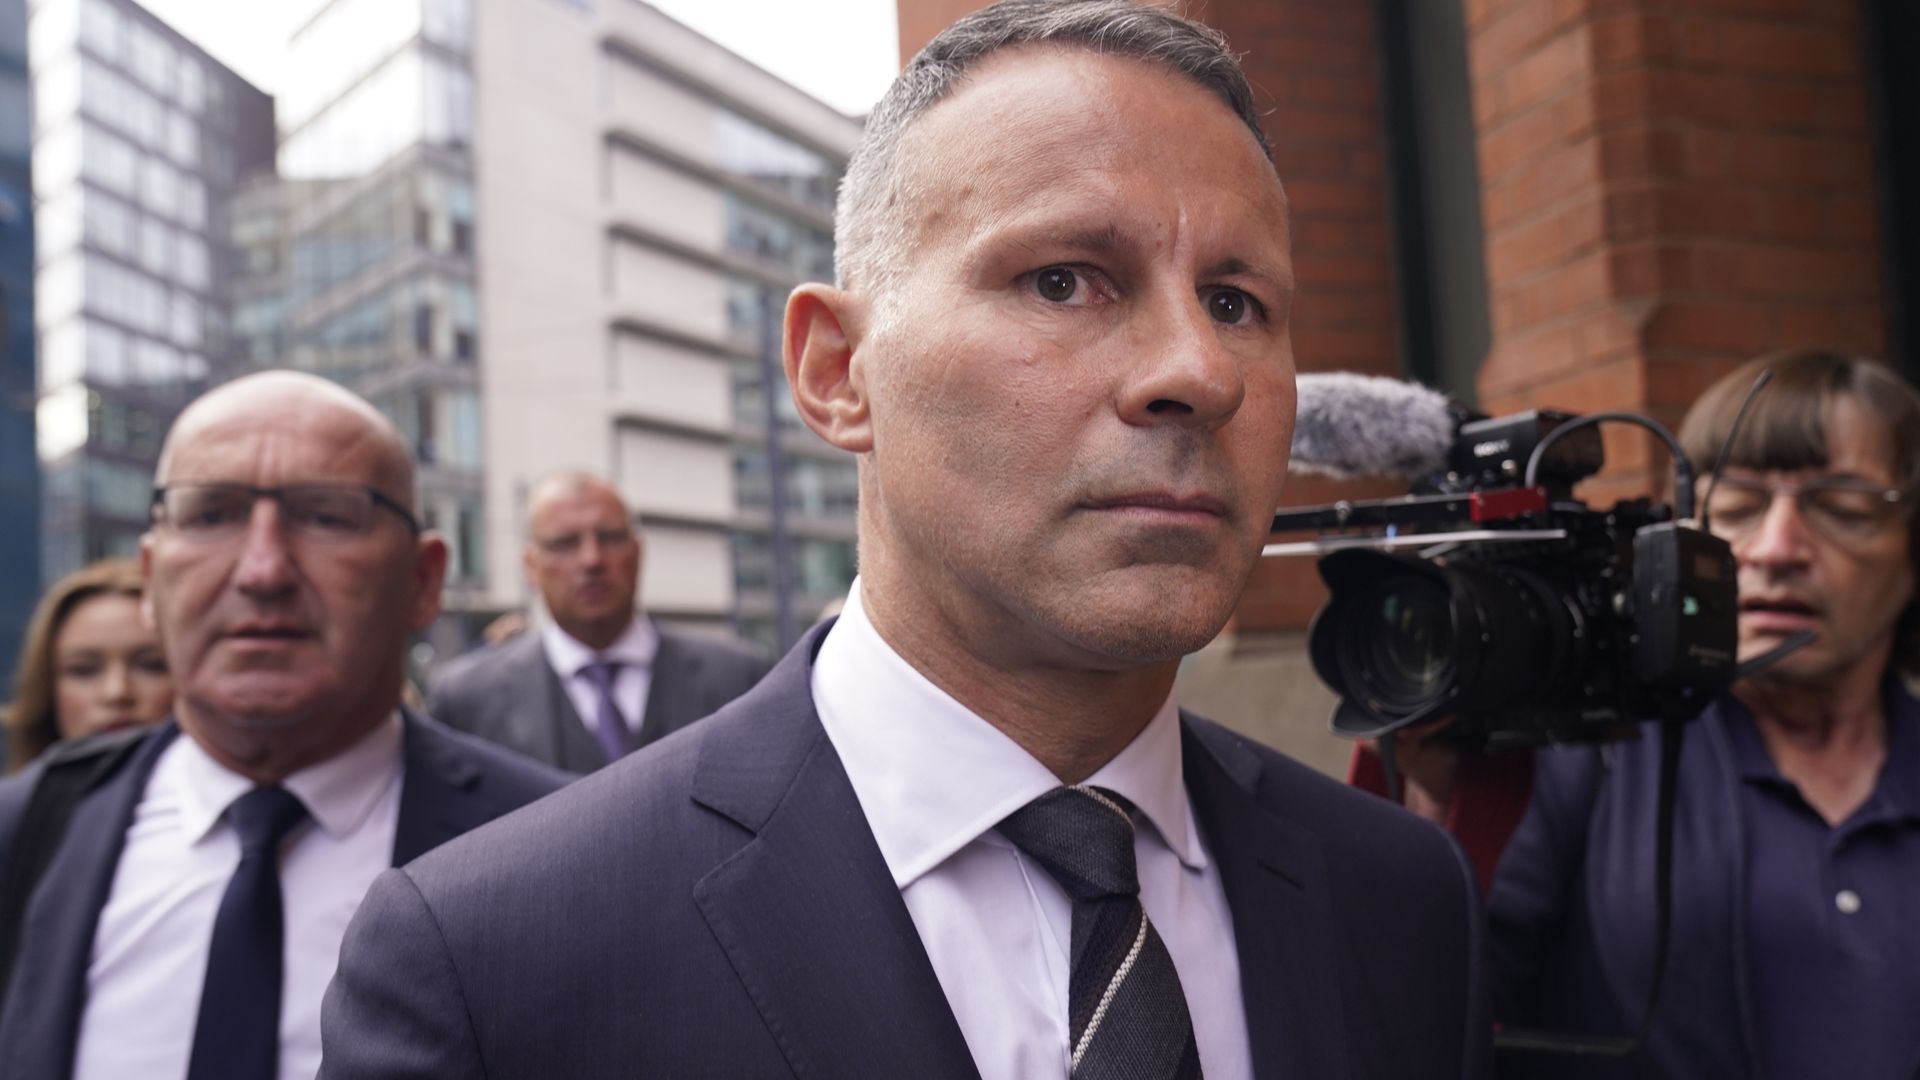 Ryan Giggs stands trial accused of attacking and controlling ex-girlfriend - live updates